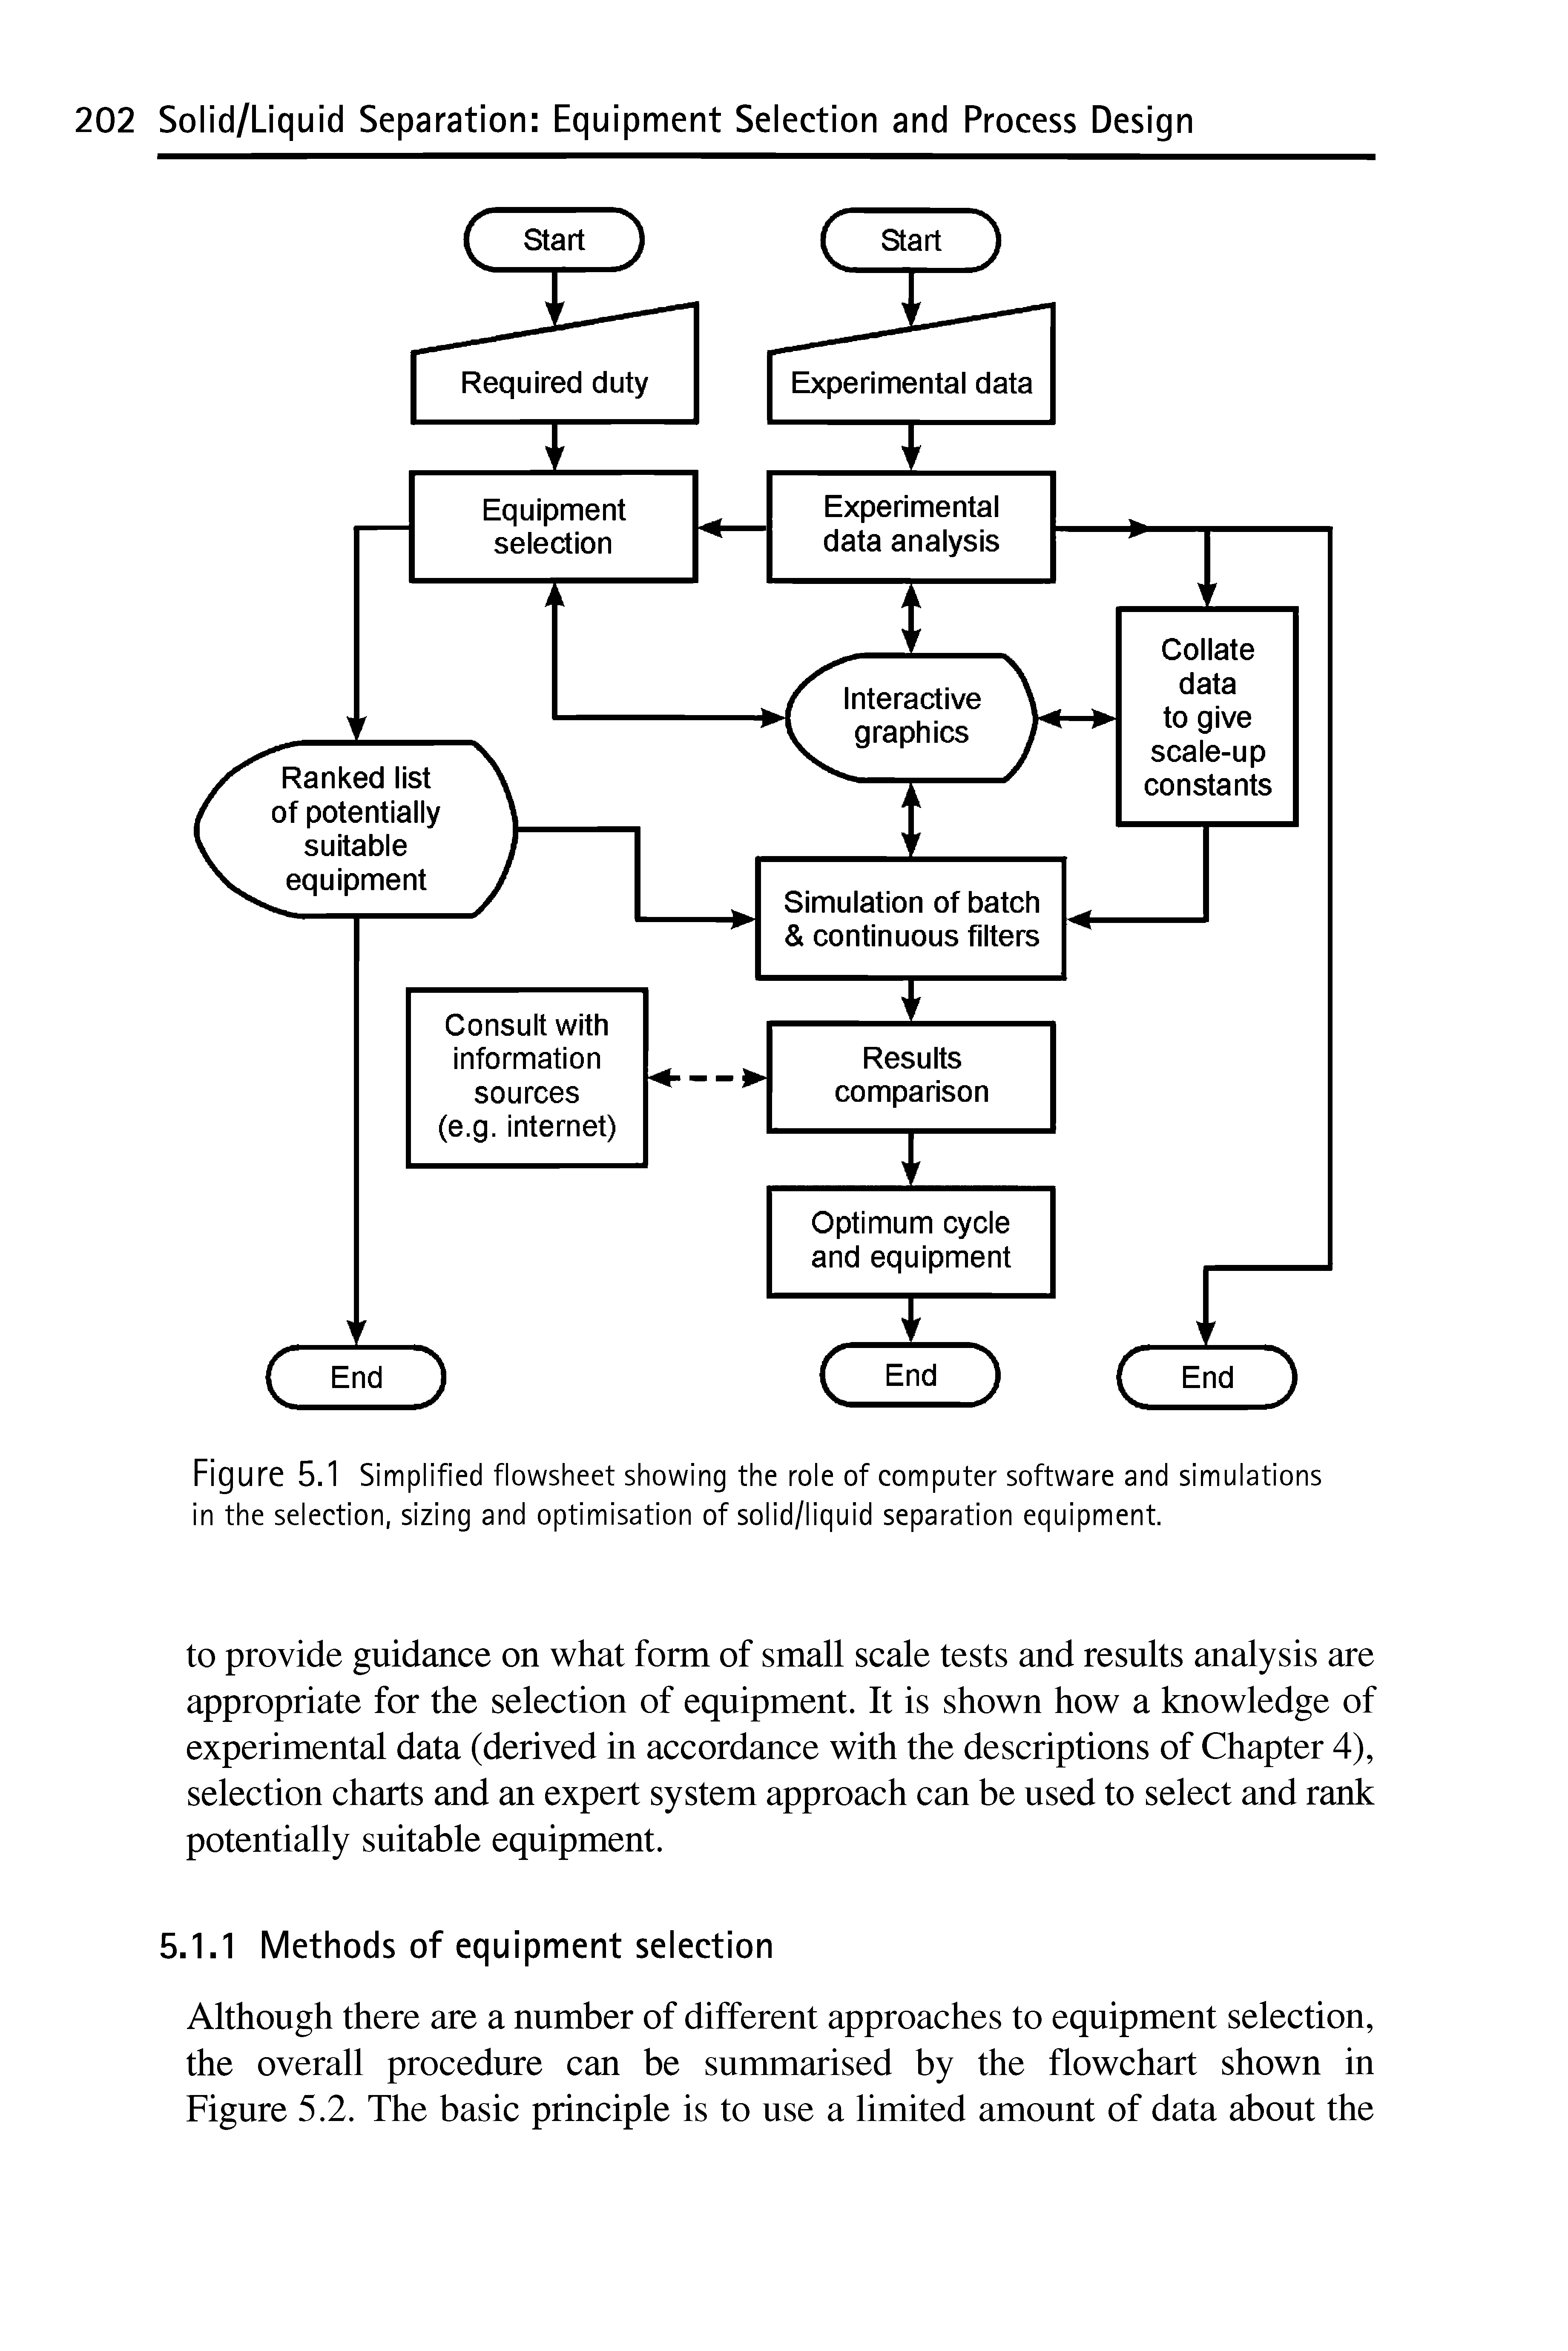 Figure 5.1 Simplified flowsheet showing the role of computer software and simulations in the selection, sizing and optimisation of solid/liquid separation equipment.